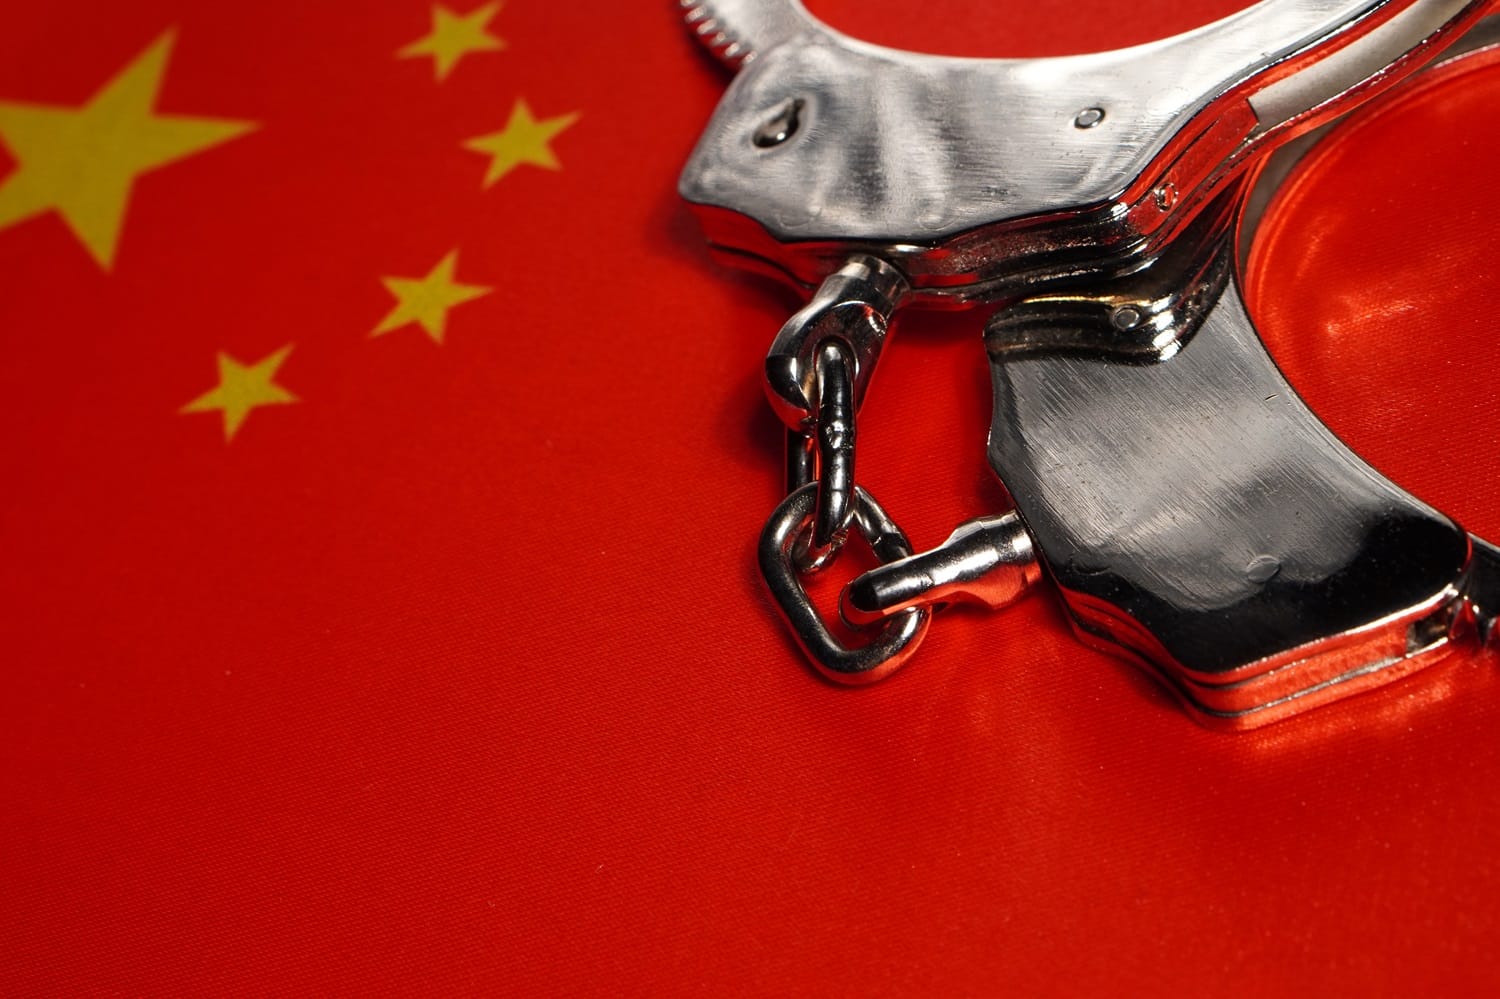 A pair of handcuffs rests on the flag of China.